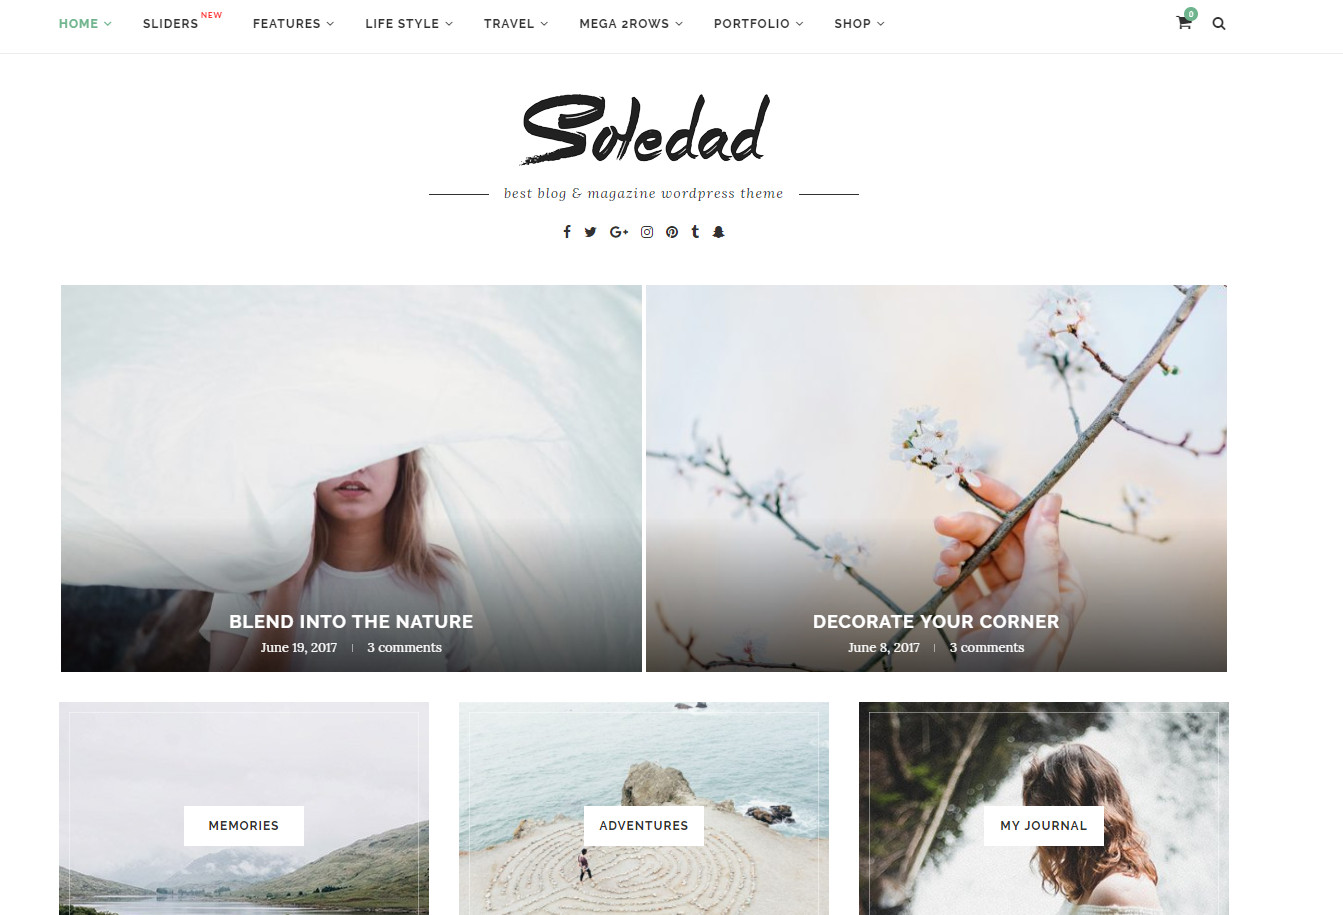 The Soledad wordpress theme is perfect for almost any business type